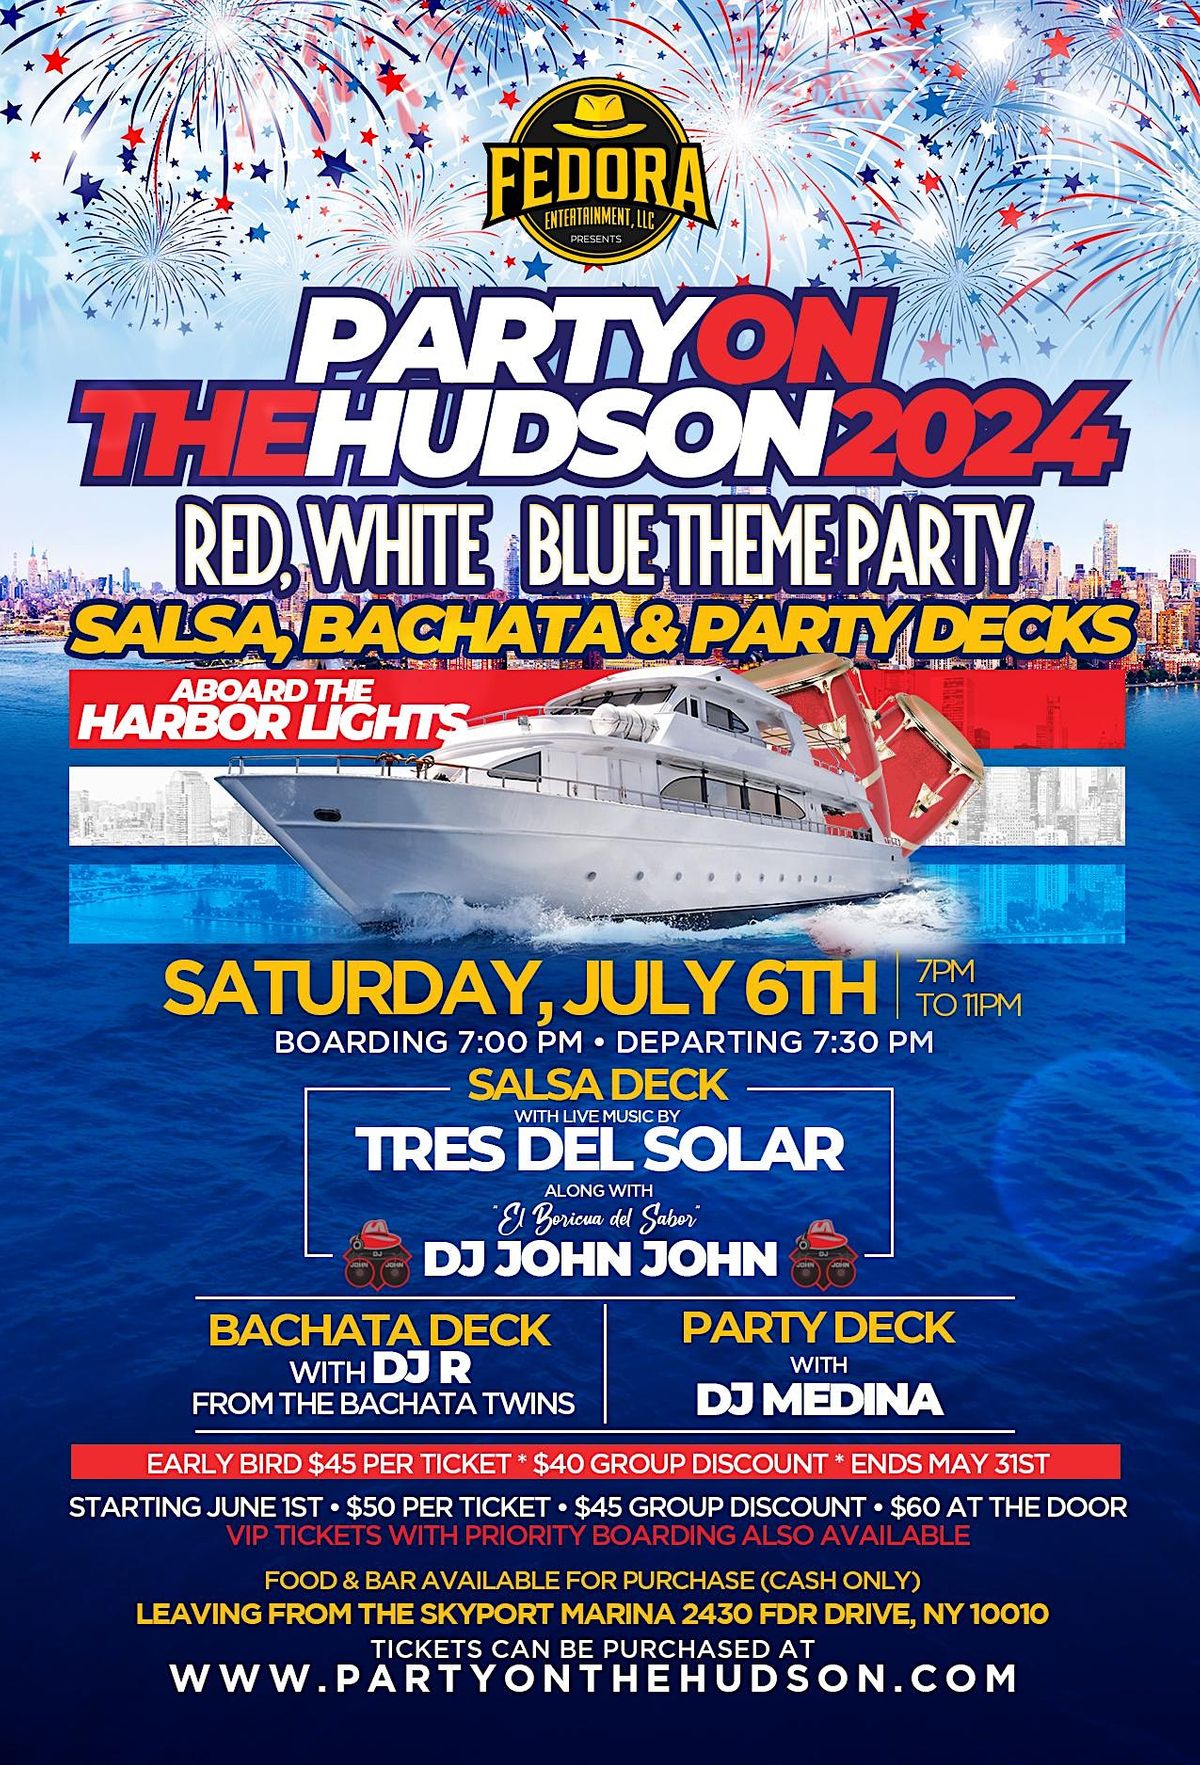 Party On The Hudson RED, WHITE & BLUE THEME PARTY with 3 Decks of Music